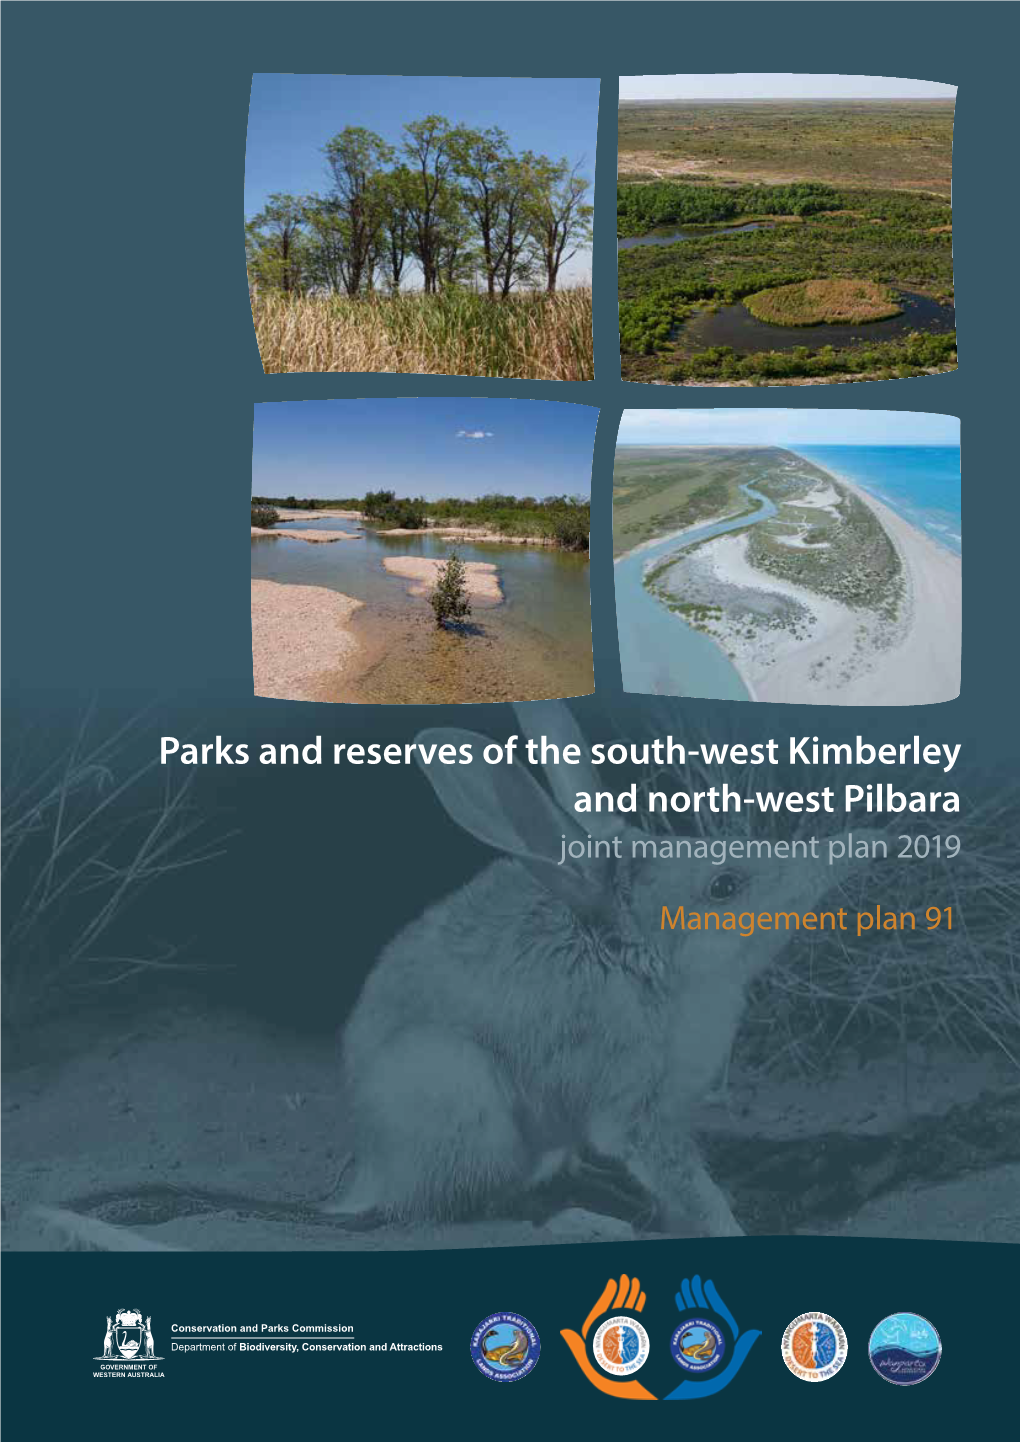 Parks and Reserves of the South-West Kimberley and North-West Pilbara Joint Management Plan 2019